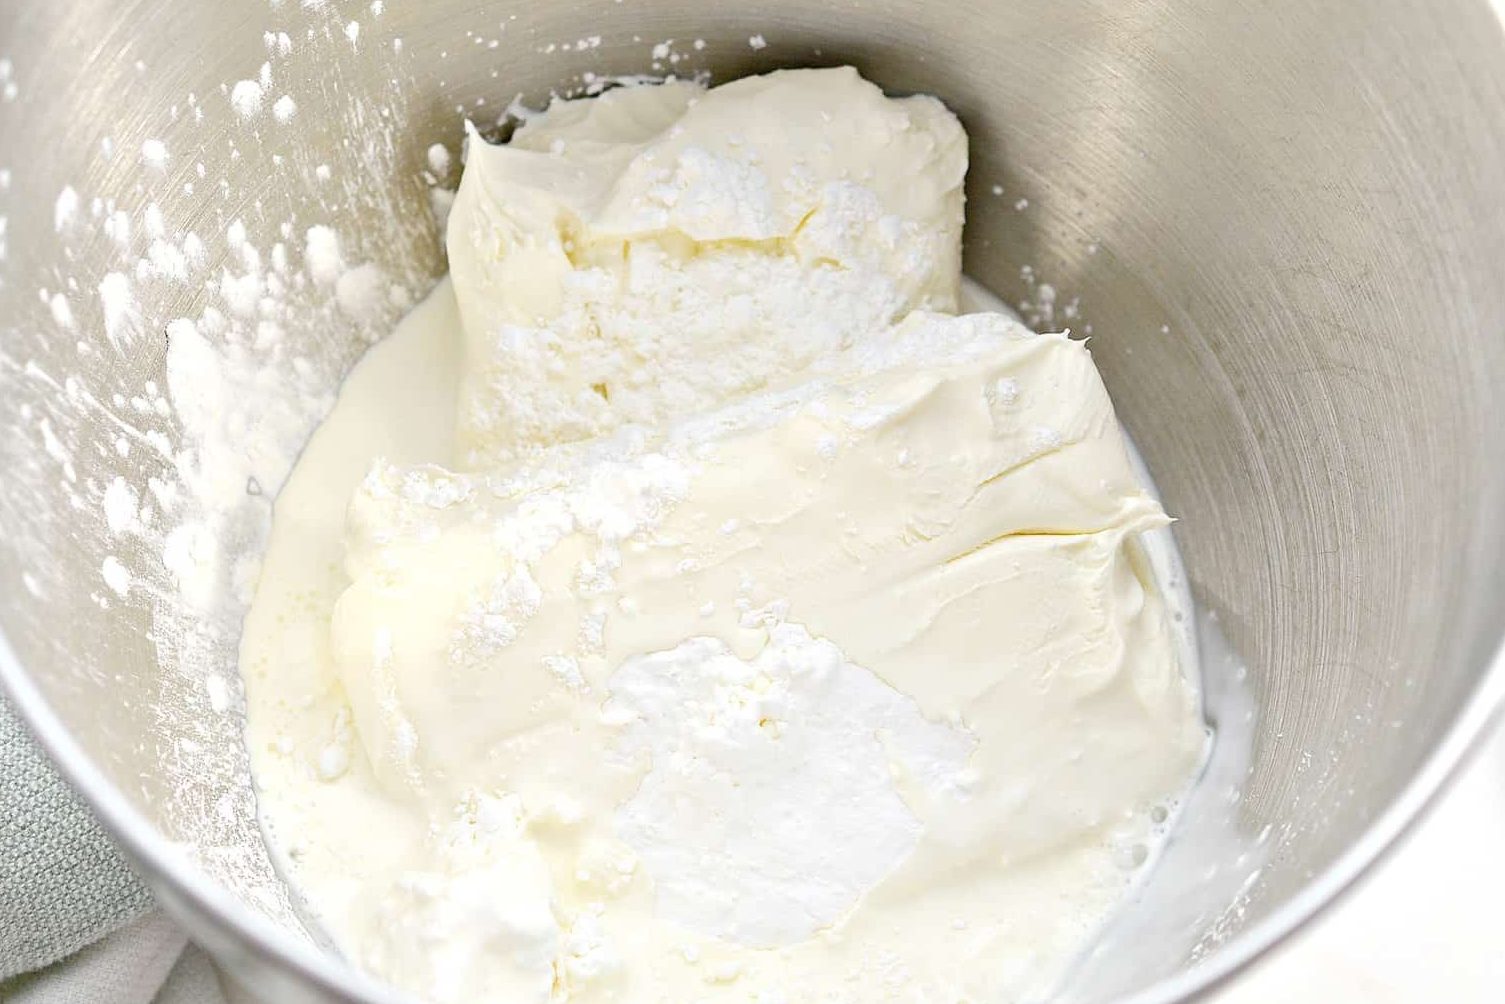 Place 16 oz of cream cheese, ¼ cup of cornstarch, and ½ cup of heavy whipping cream into a mixing bowl.